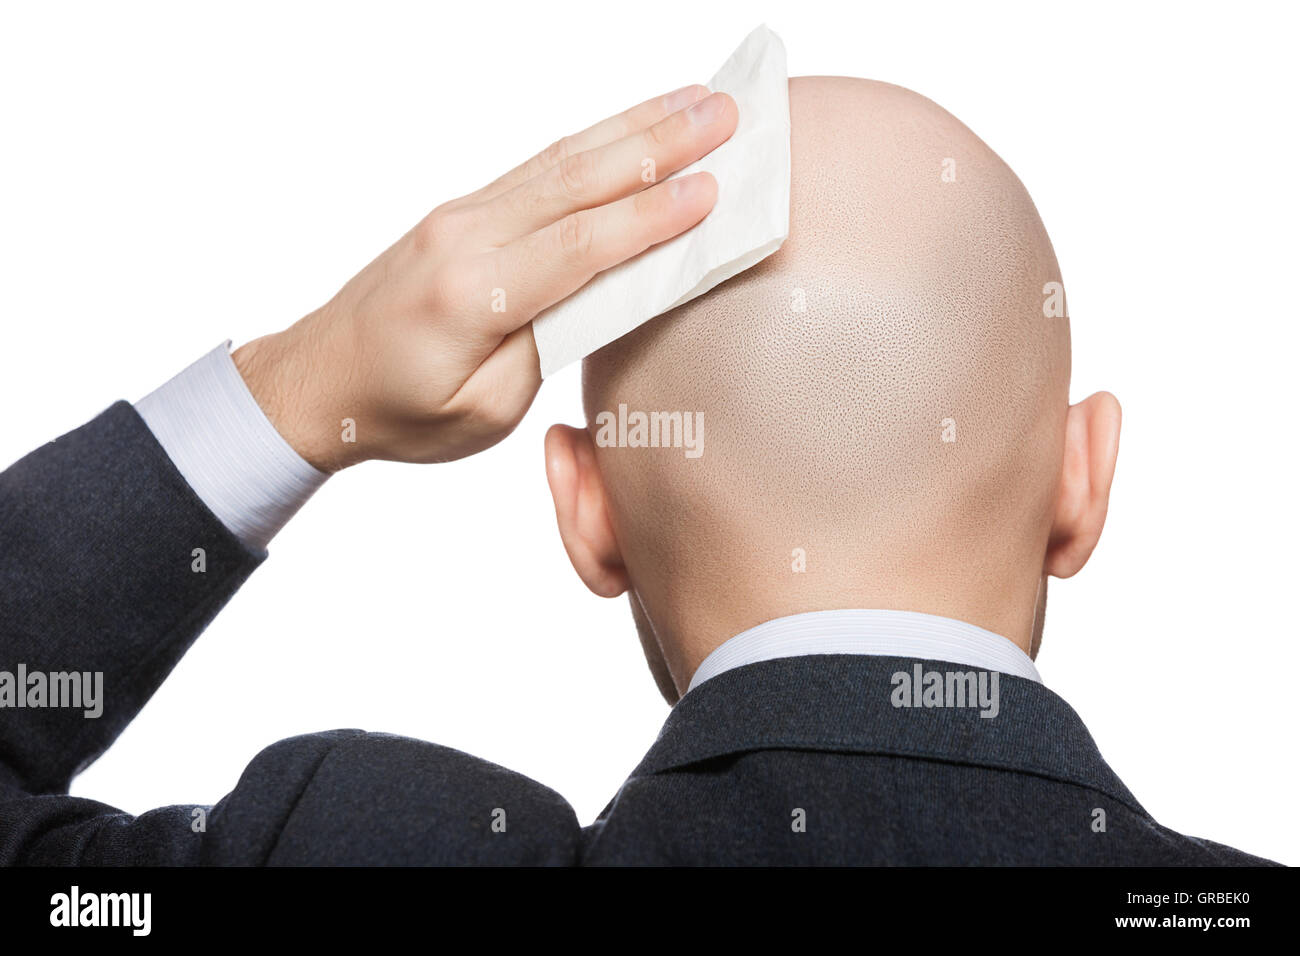 Hand holding tissue wiping or drying bald sweat head Stock Photo - Alamy